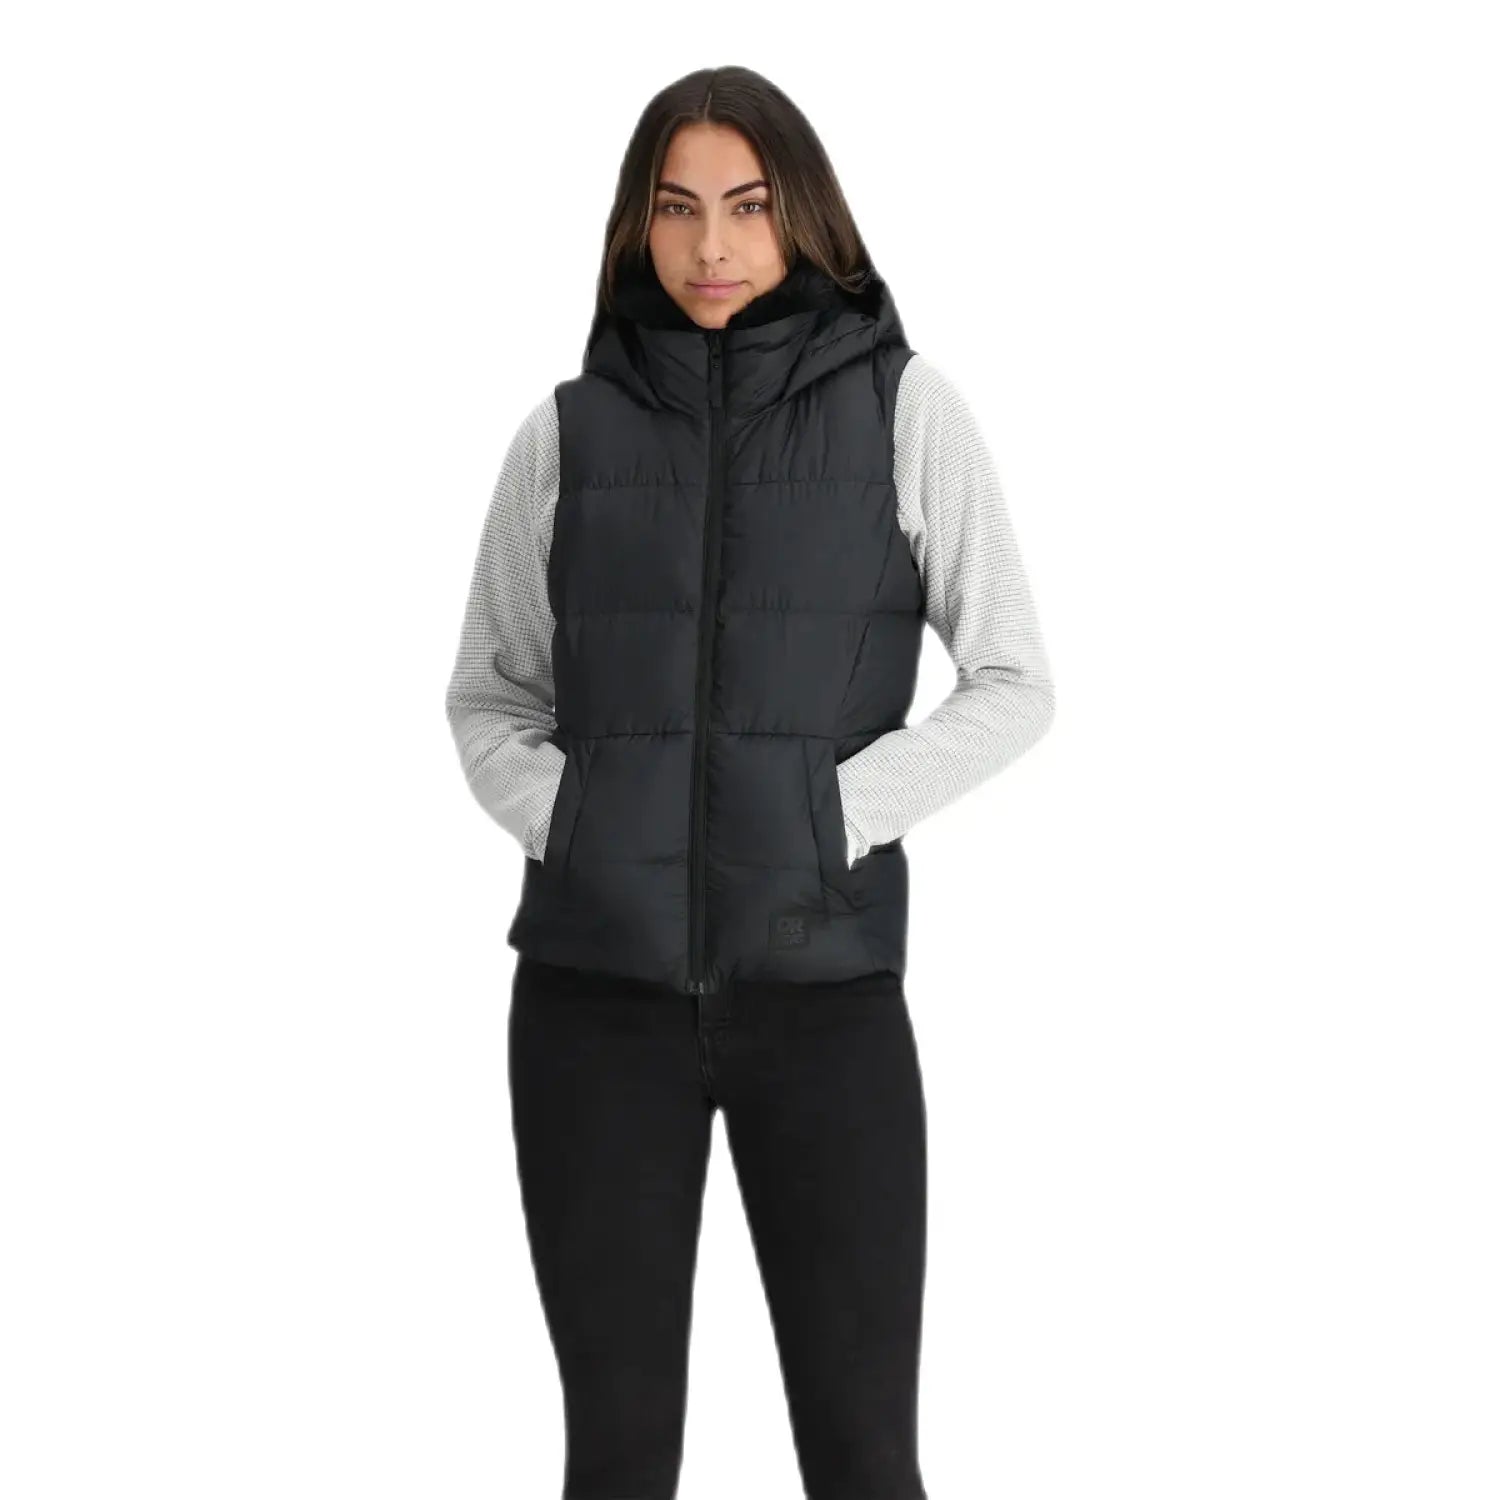 Outdoor Research Women's Coldfront Hooded Down Vest II shown in the Black color option. Front view on a model.